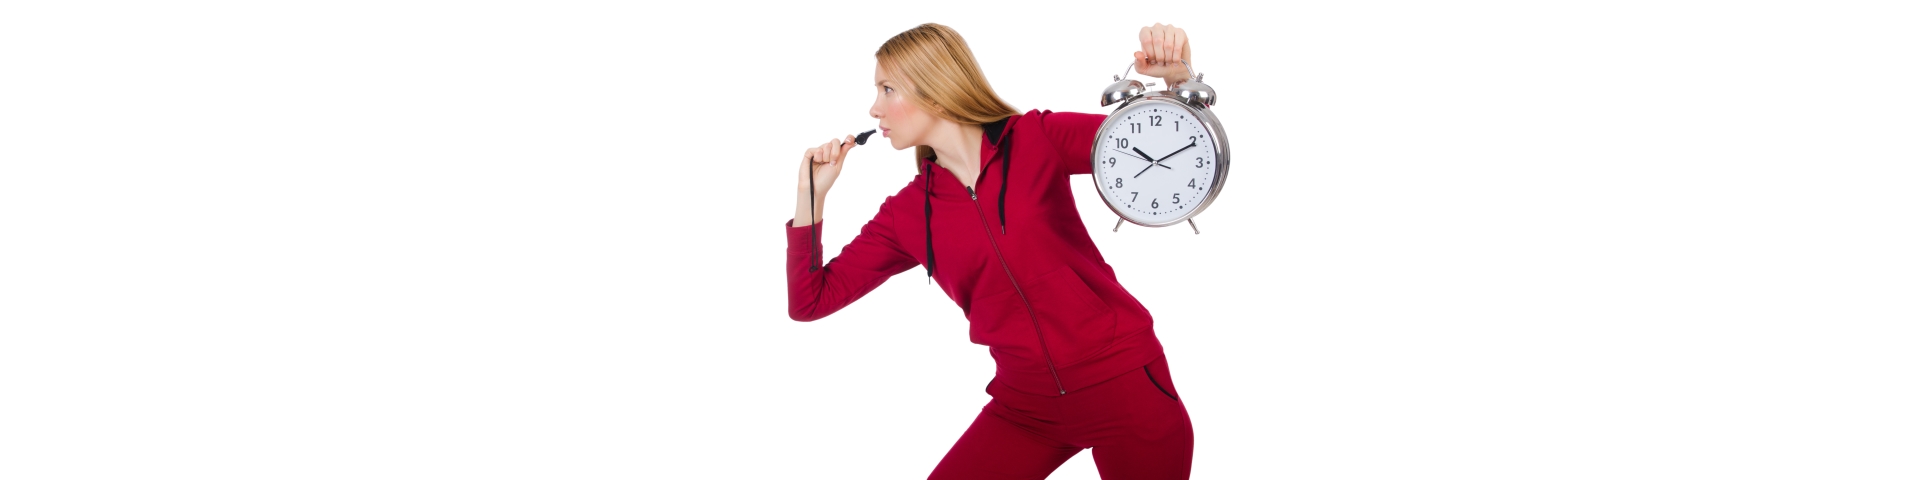 training-female-with-clock-and-whistle